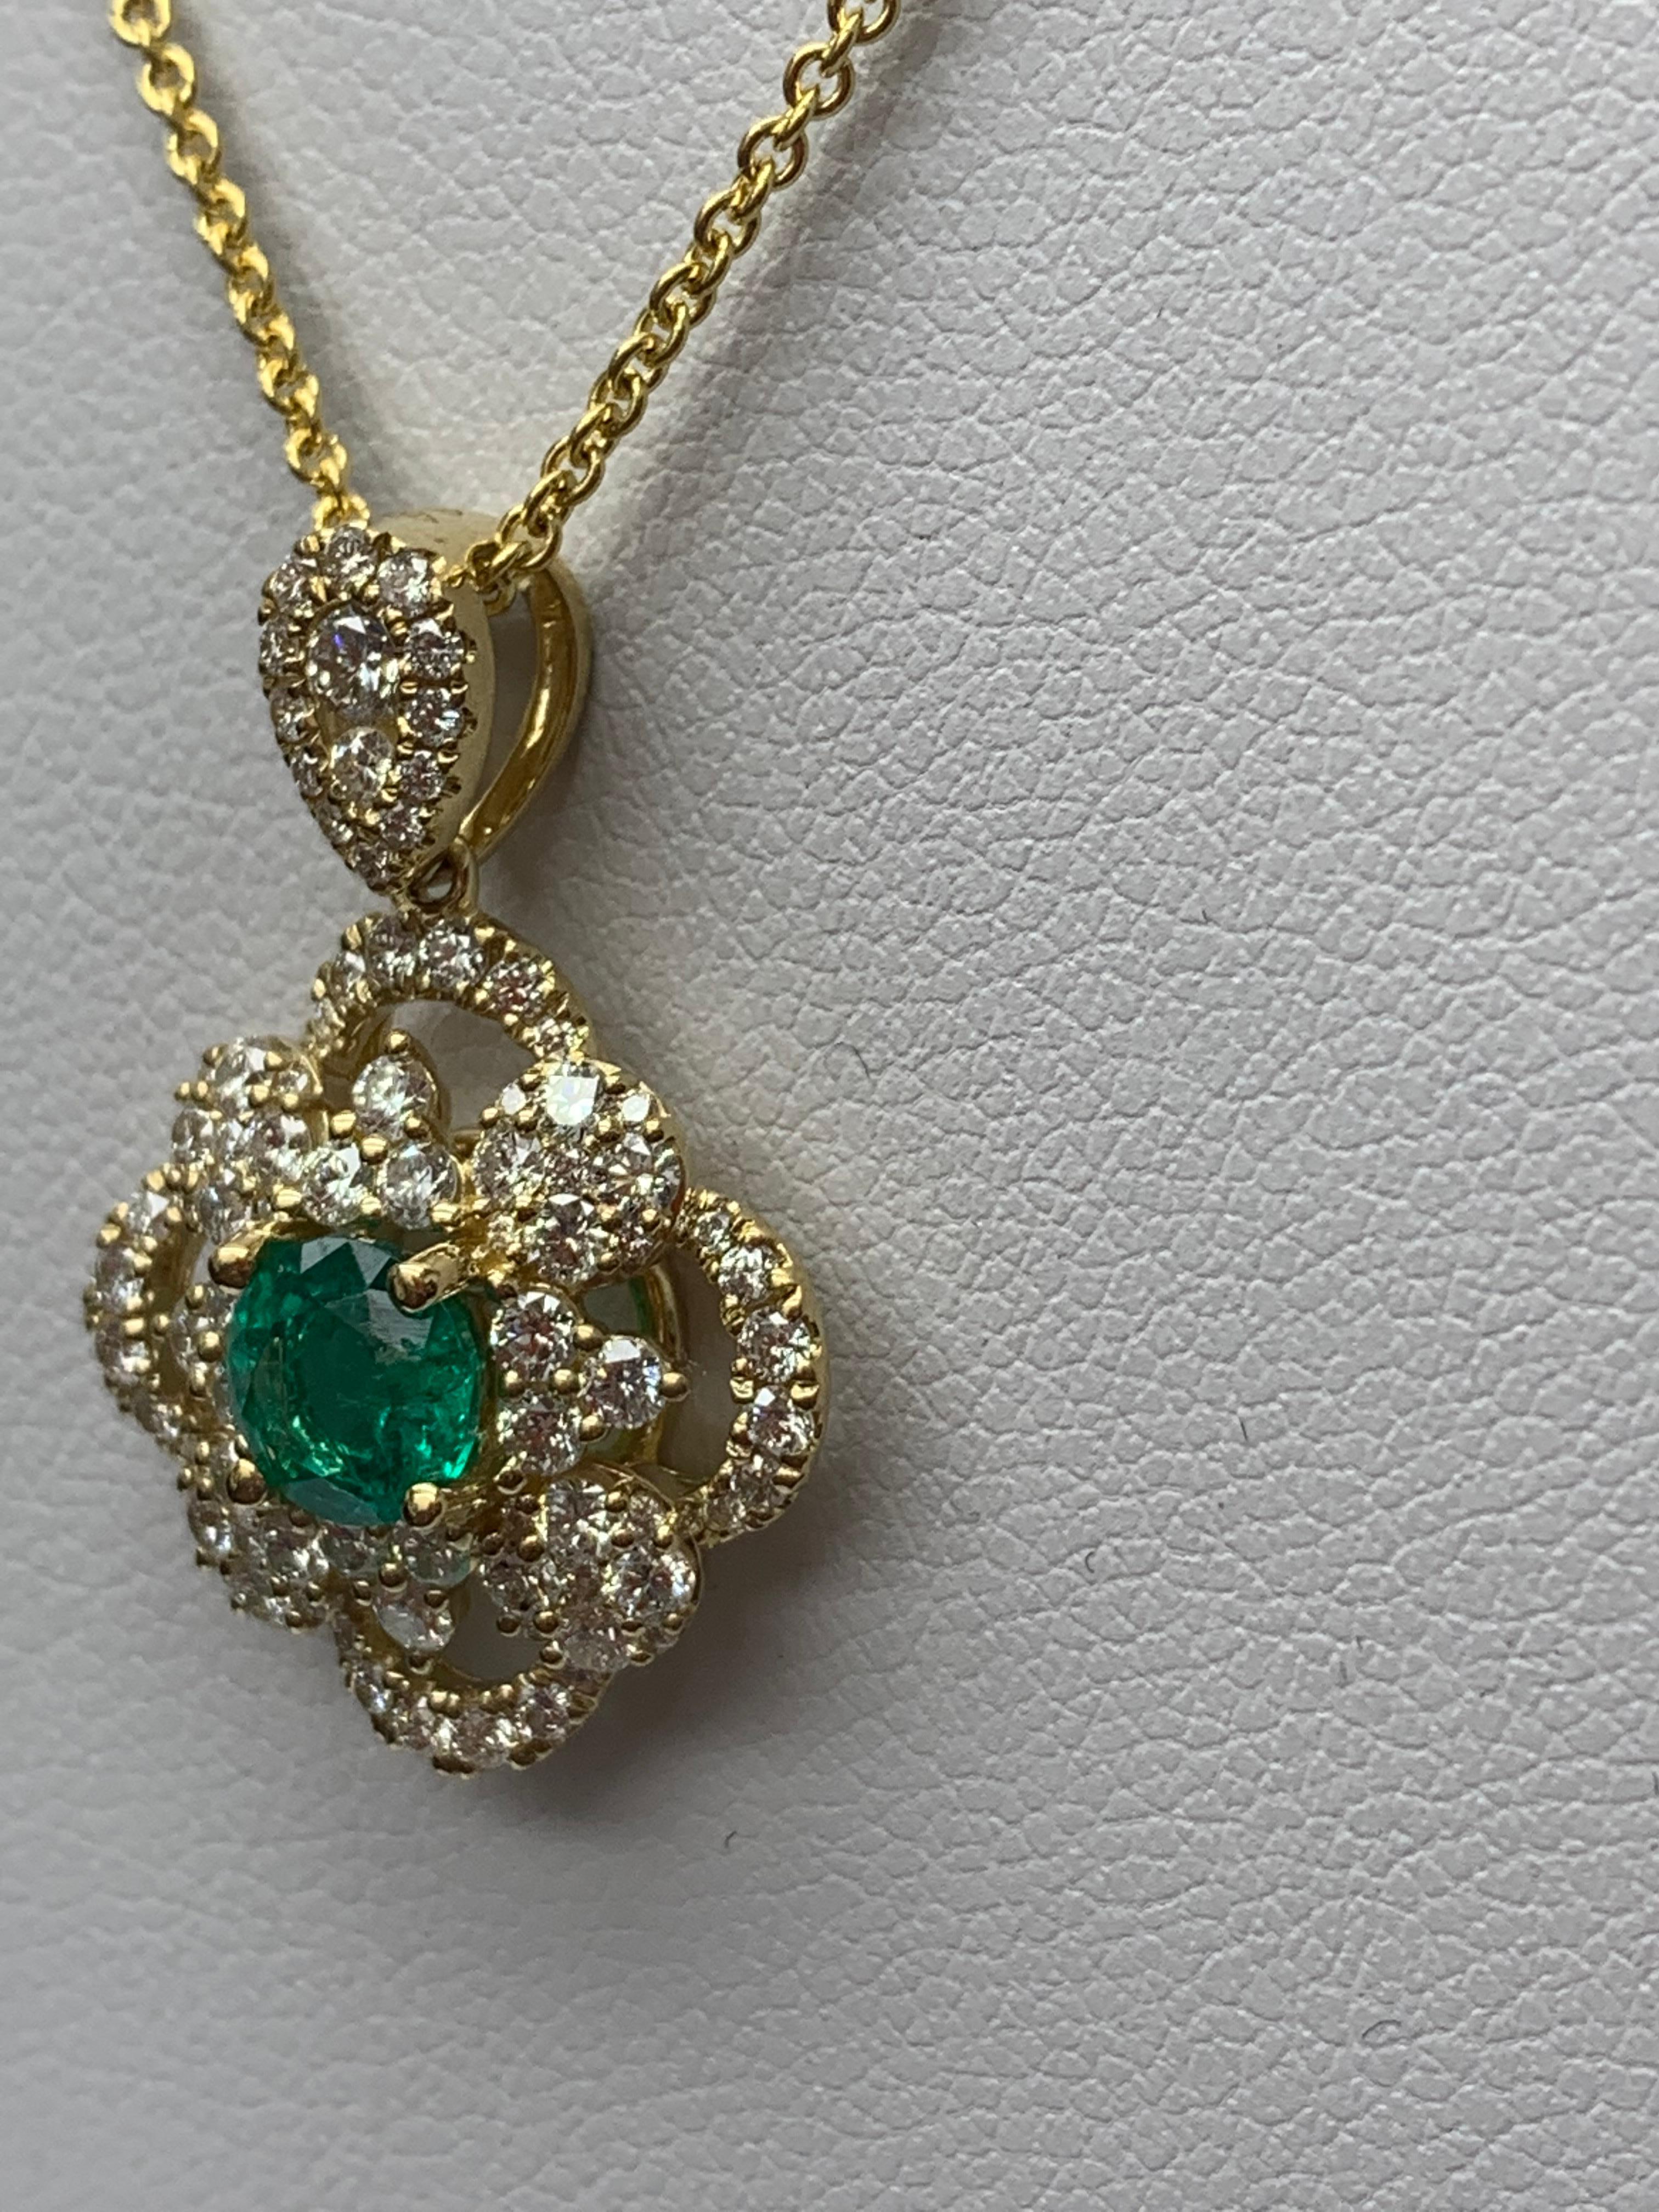 0.67 Carat Round Cut Emerald and Diamond Pendant Necklace in 18K Yellow Gold For Sale 1